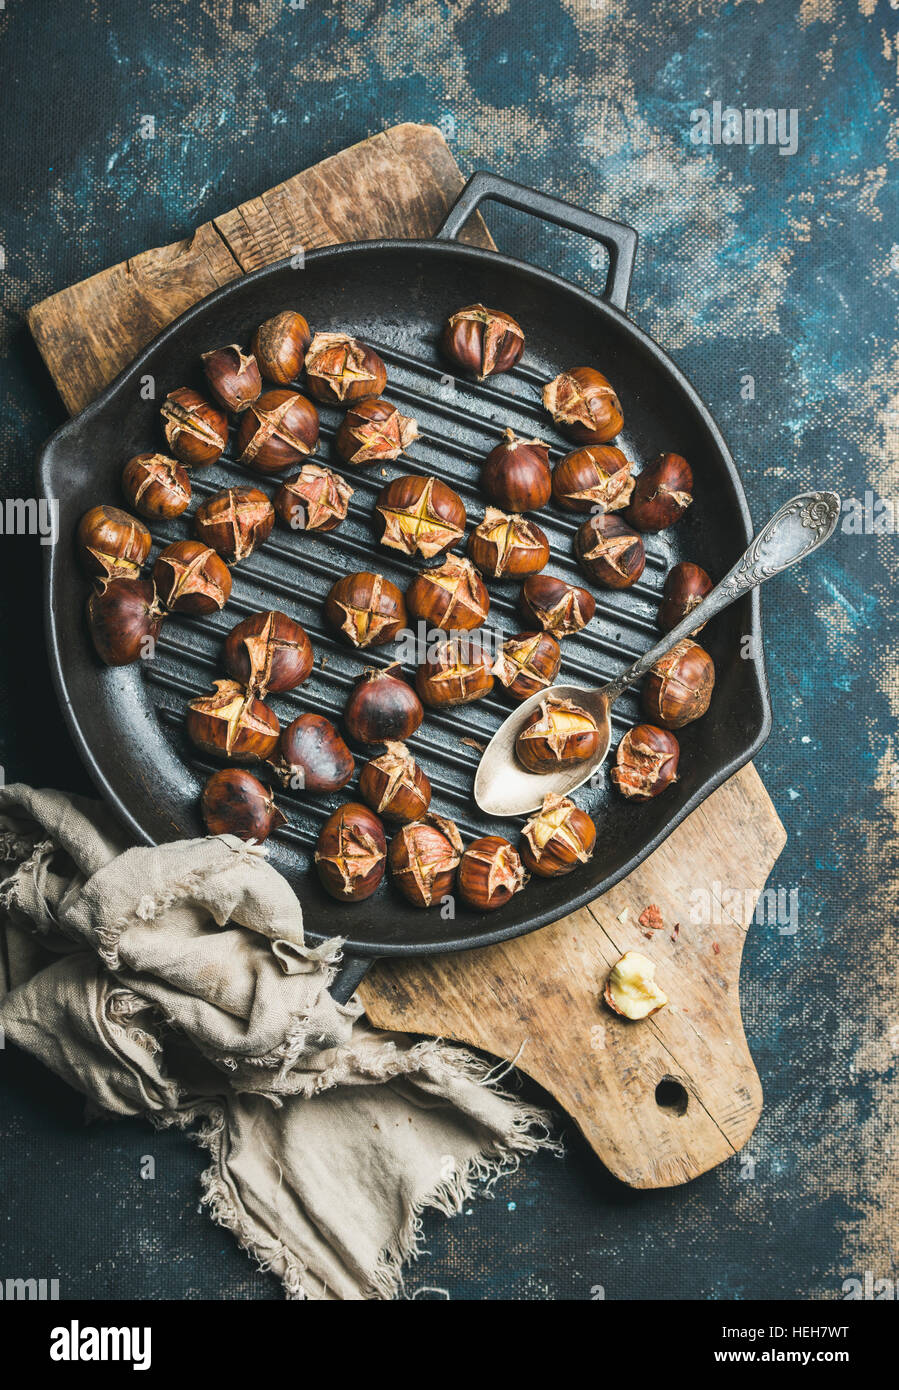 Roasted chestnuts in cast iron grilling pan over rustic wooden board and dark blue shabby plywood background, top view, vertical composition Stock Photo